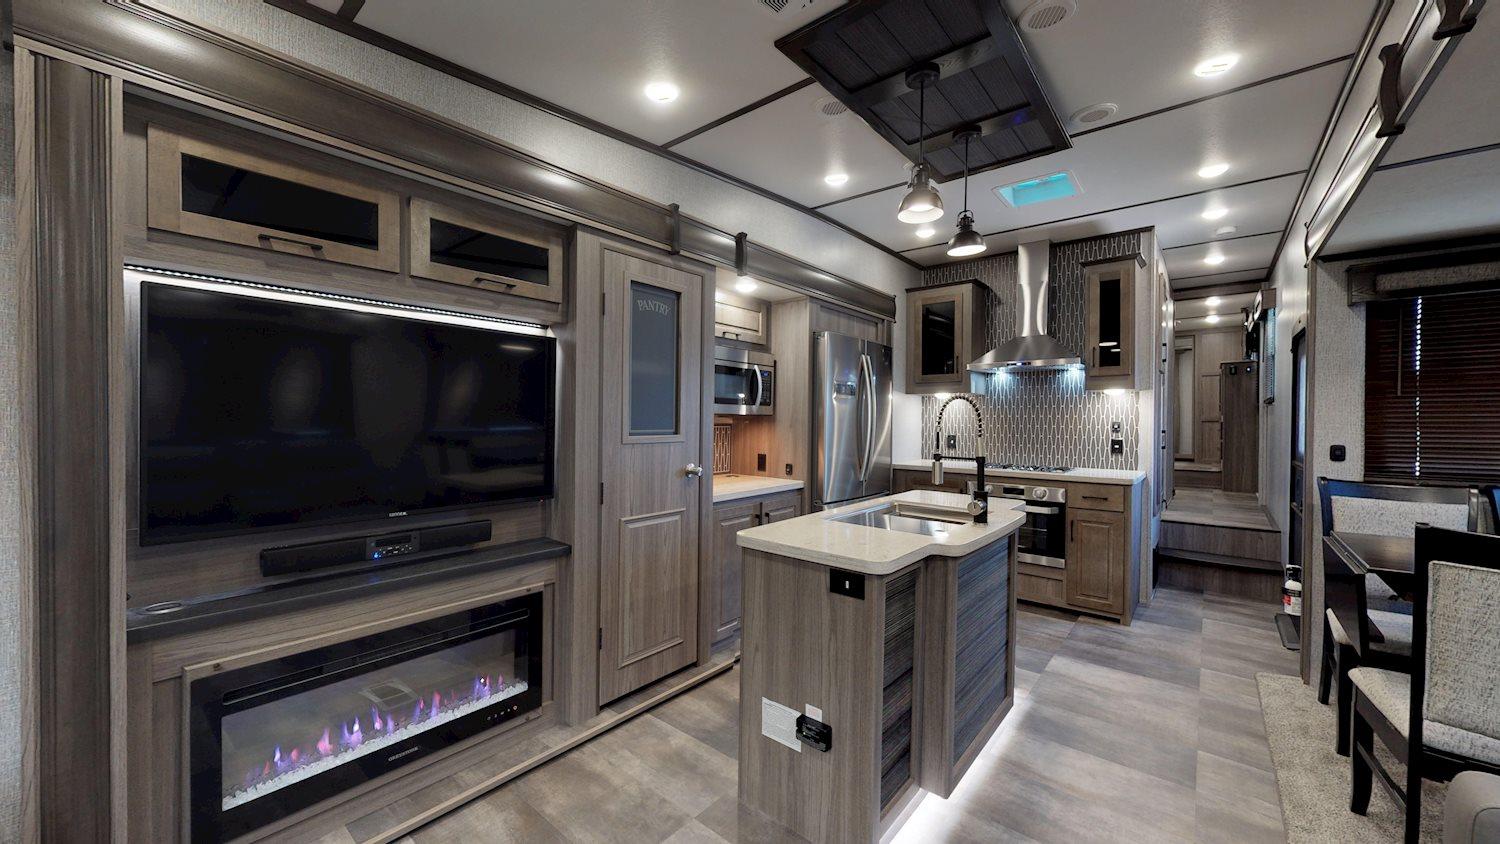 Awe-inspiring Ideas Of Front Kitchen 5th Wheel Ideas | Direct to Kitchen